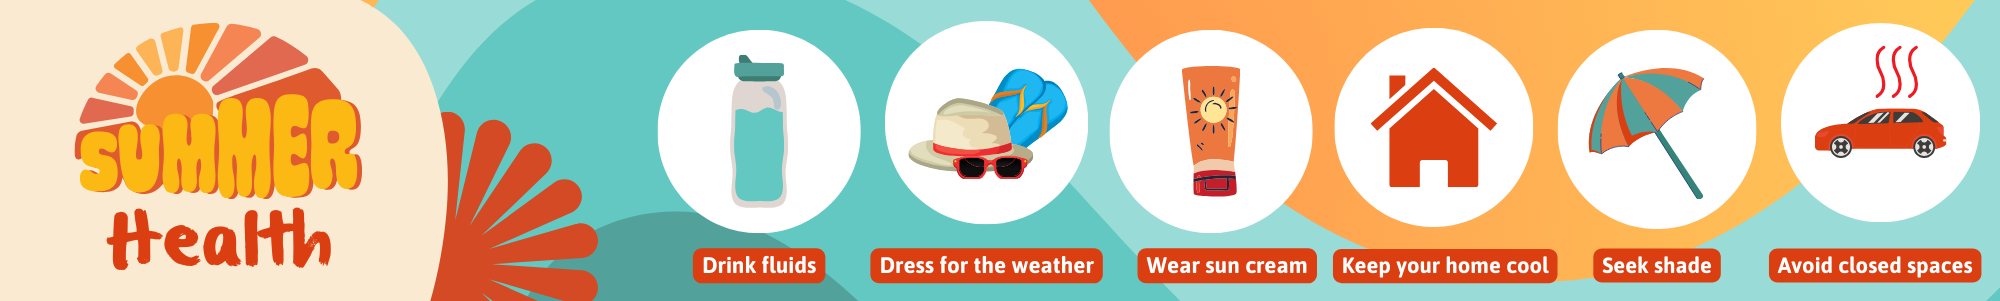 Summer health banner- stay safe by wearing sun cream, seeking shade and staying out of hot vehicles 